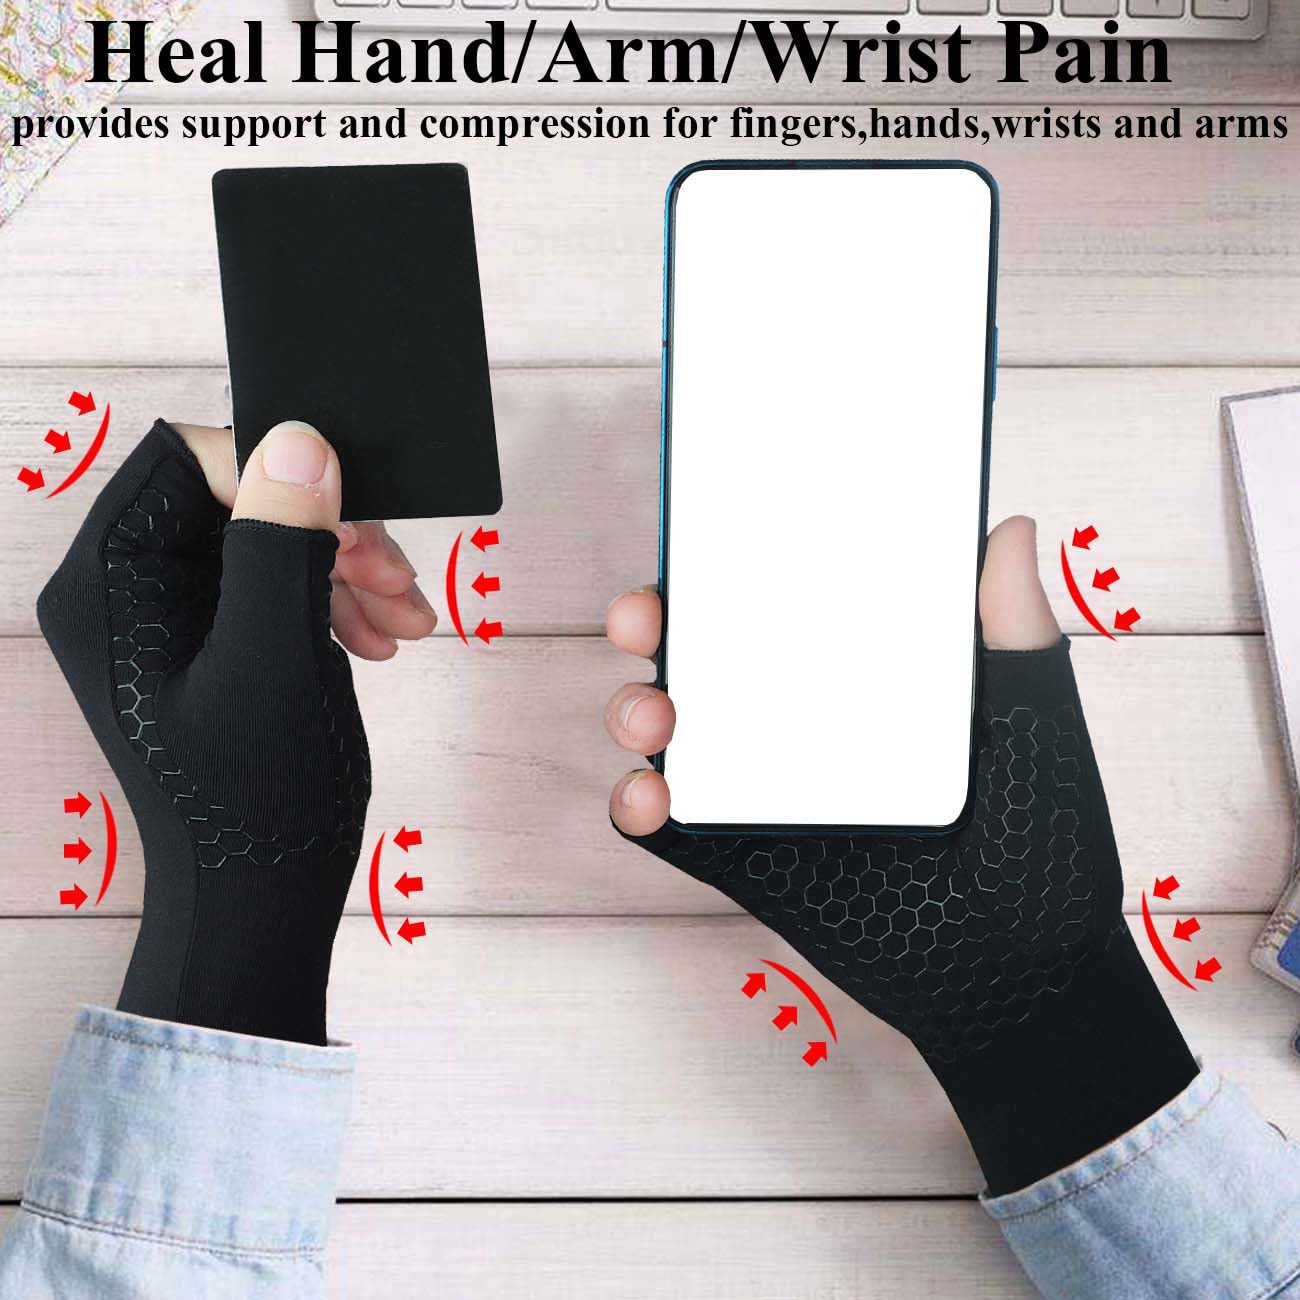 Long Copper Arthritis Gloves for Carpal Tunnel, Compression Gloves for Hand Pain Relief, Wrist Arm Support, Fingerless Typing Gloves for Rheumatoid, Tendonitis, Fits Women Men, 1 Pair